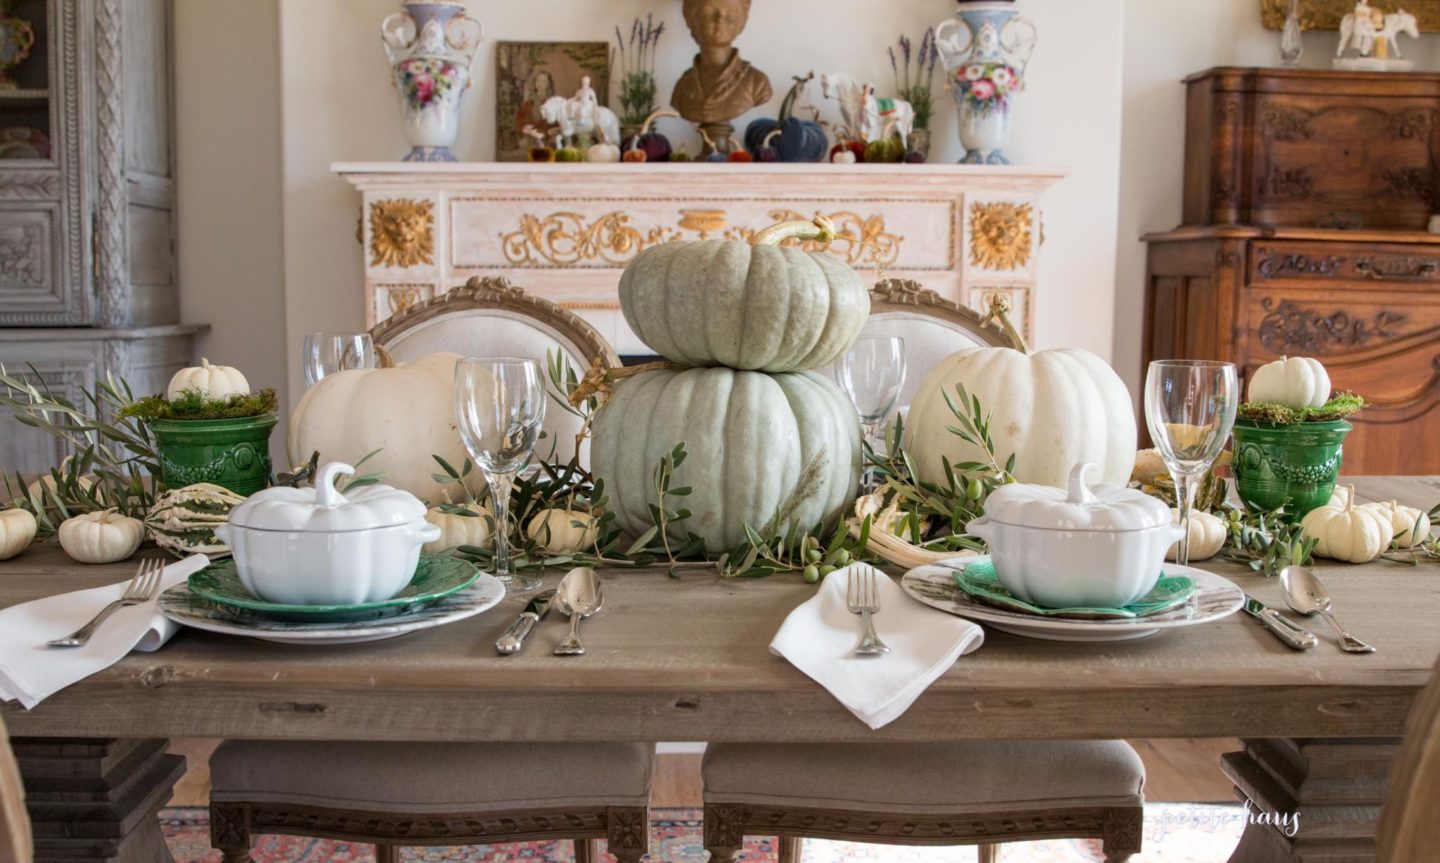 Fall table setting with green and white